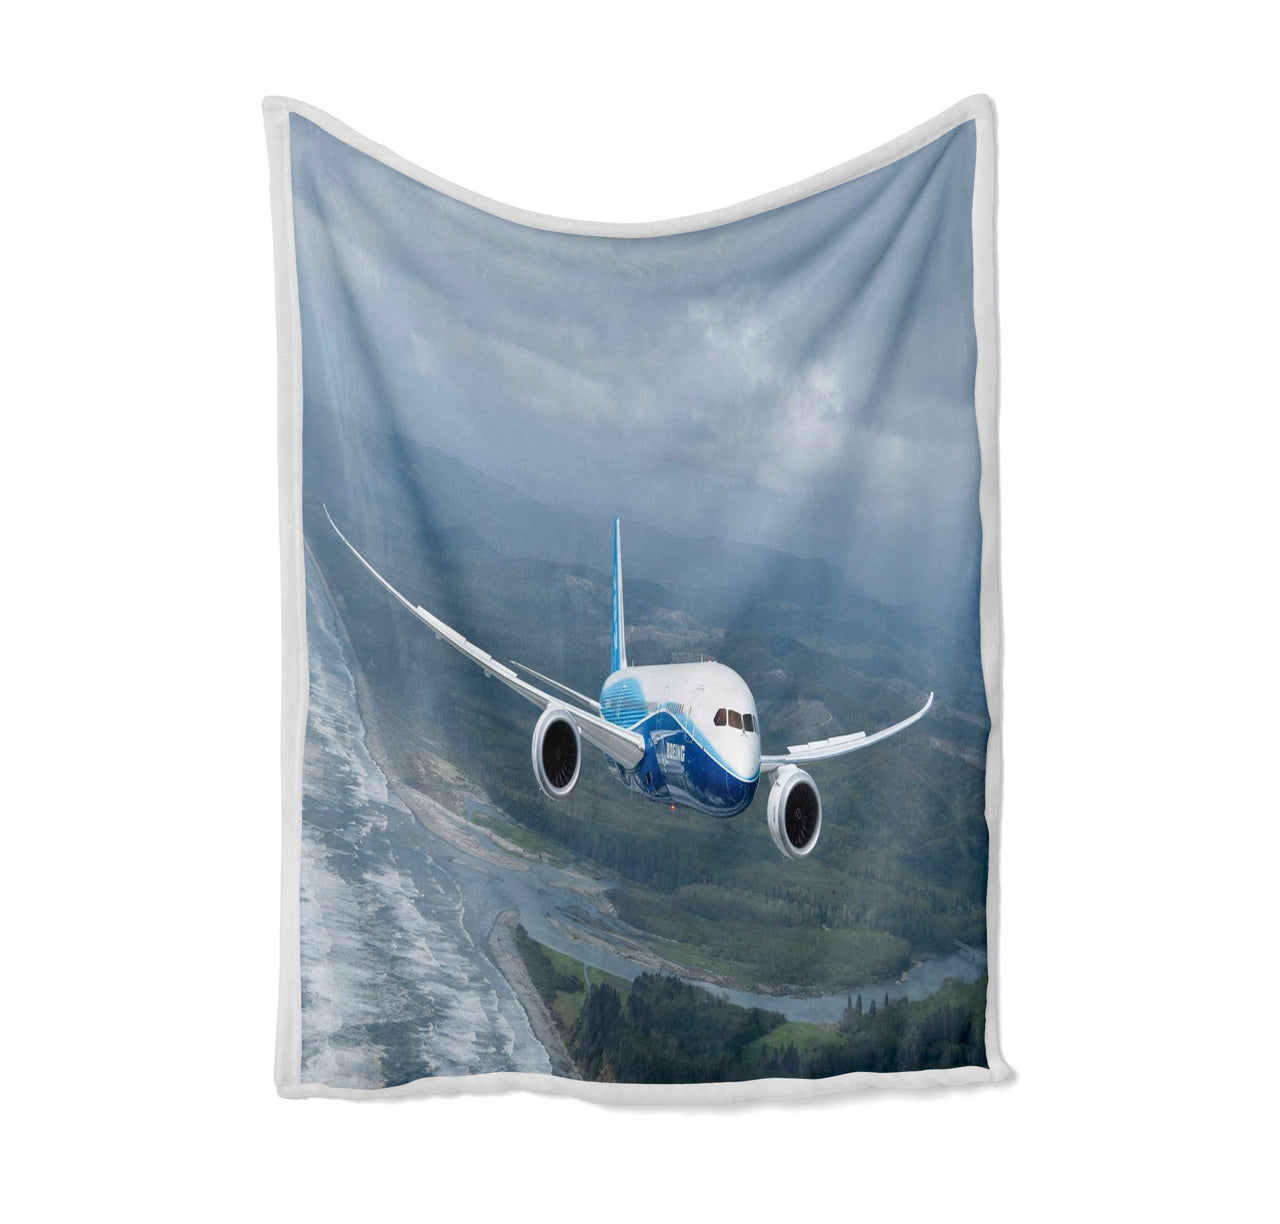 Cruising Boeing 787 Designed Bed Blankets & Covers